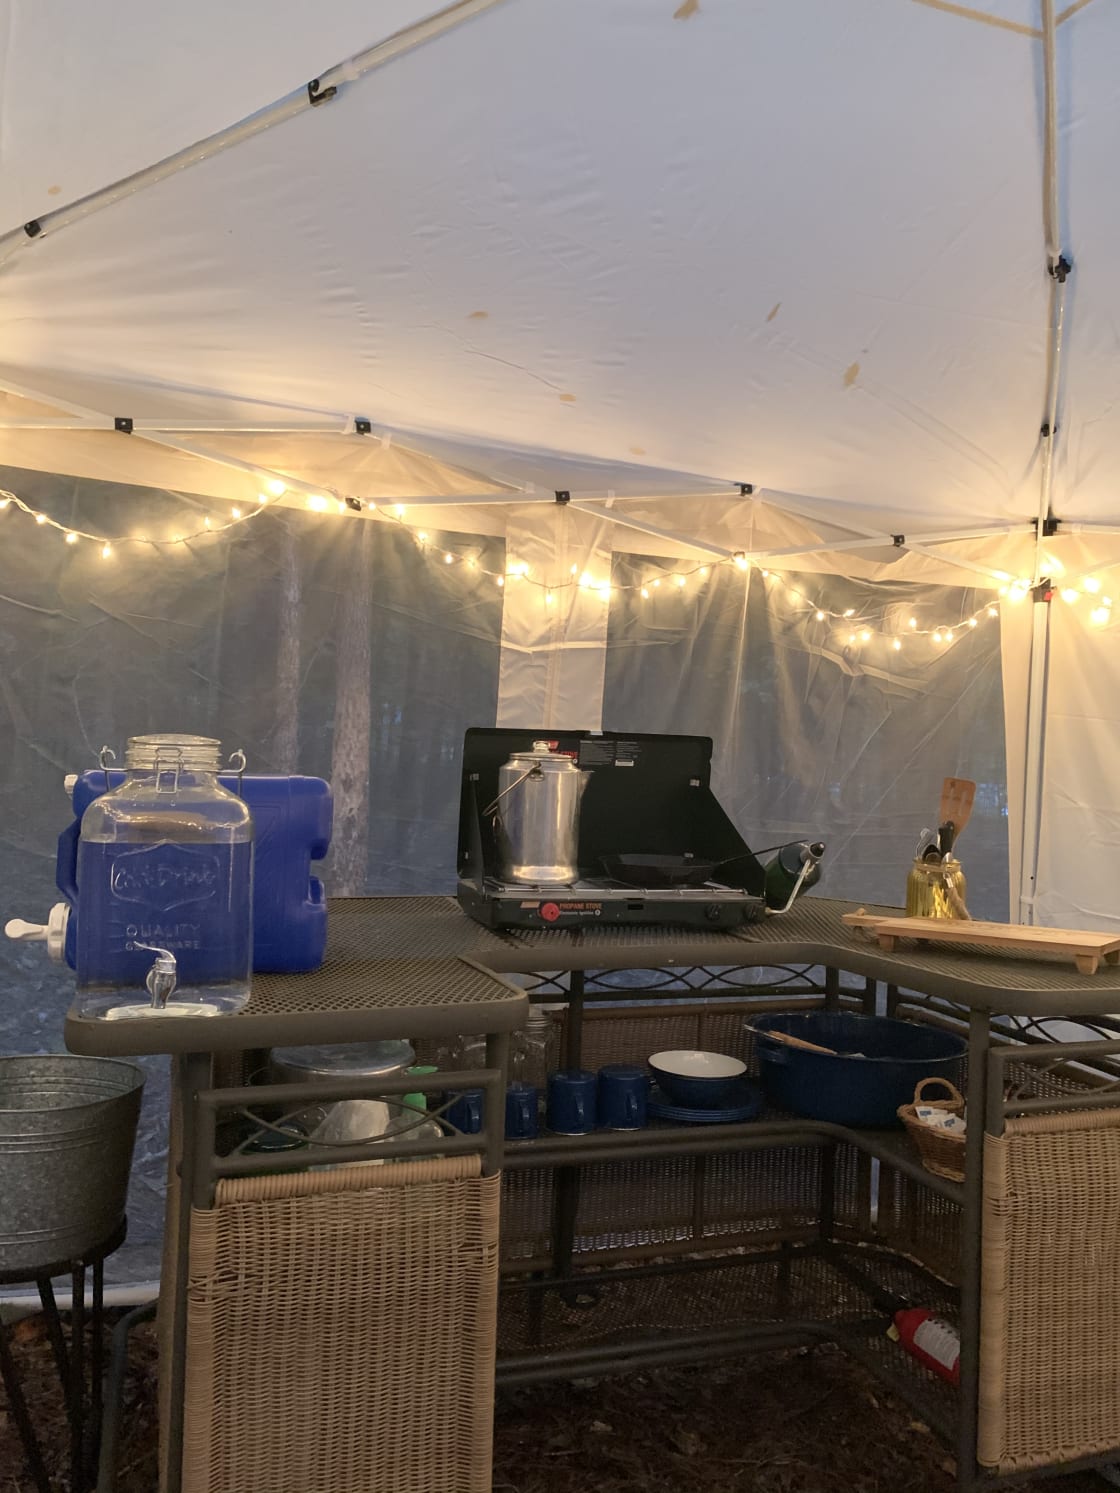 Private kitchen setup with all basic necessities. We provide a yeti cooler for your food/drink storage. Please bring ice!